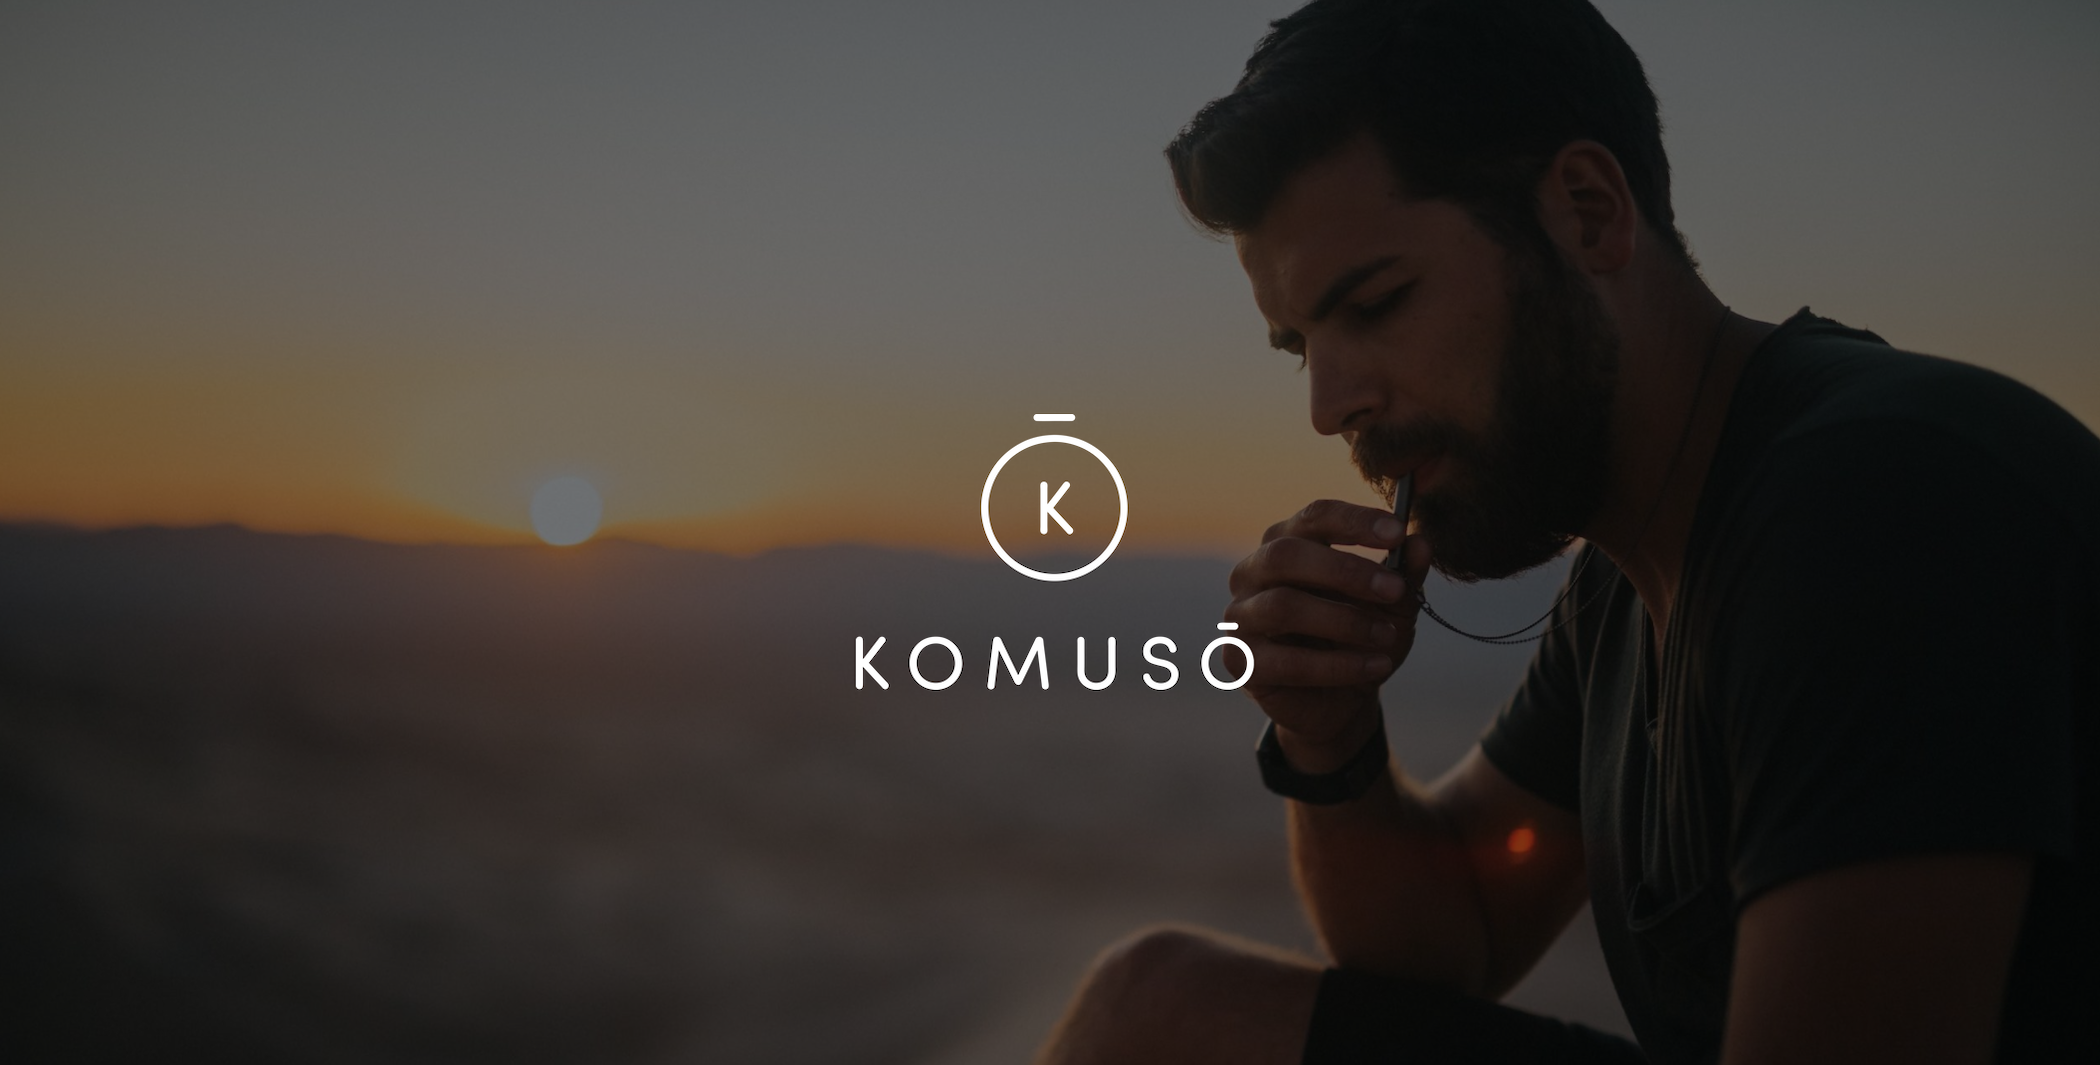 Branding services for Komuso Design White Komuso logo with dimmed background of a bearded man blowing a whistle with a view of the sun setting in the valley behind him